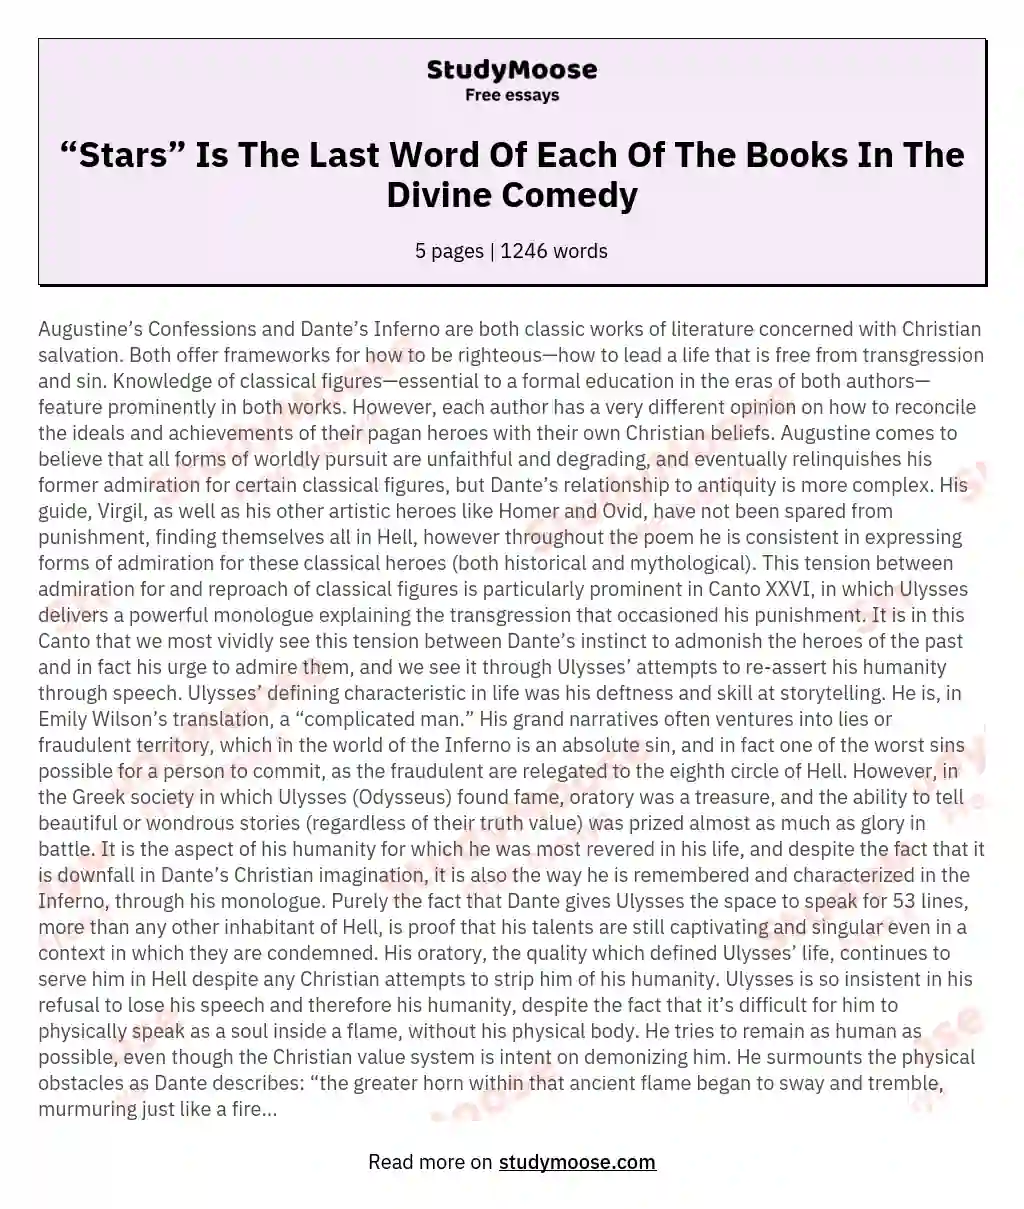 “Stars” Is The Last Word Of Each Of The Books In The Divine Comedy essay